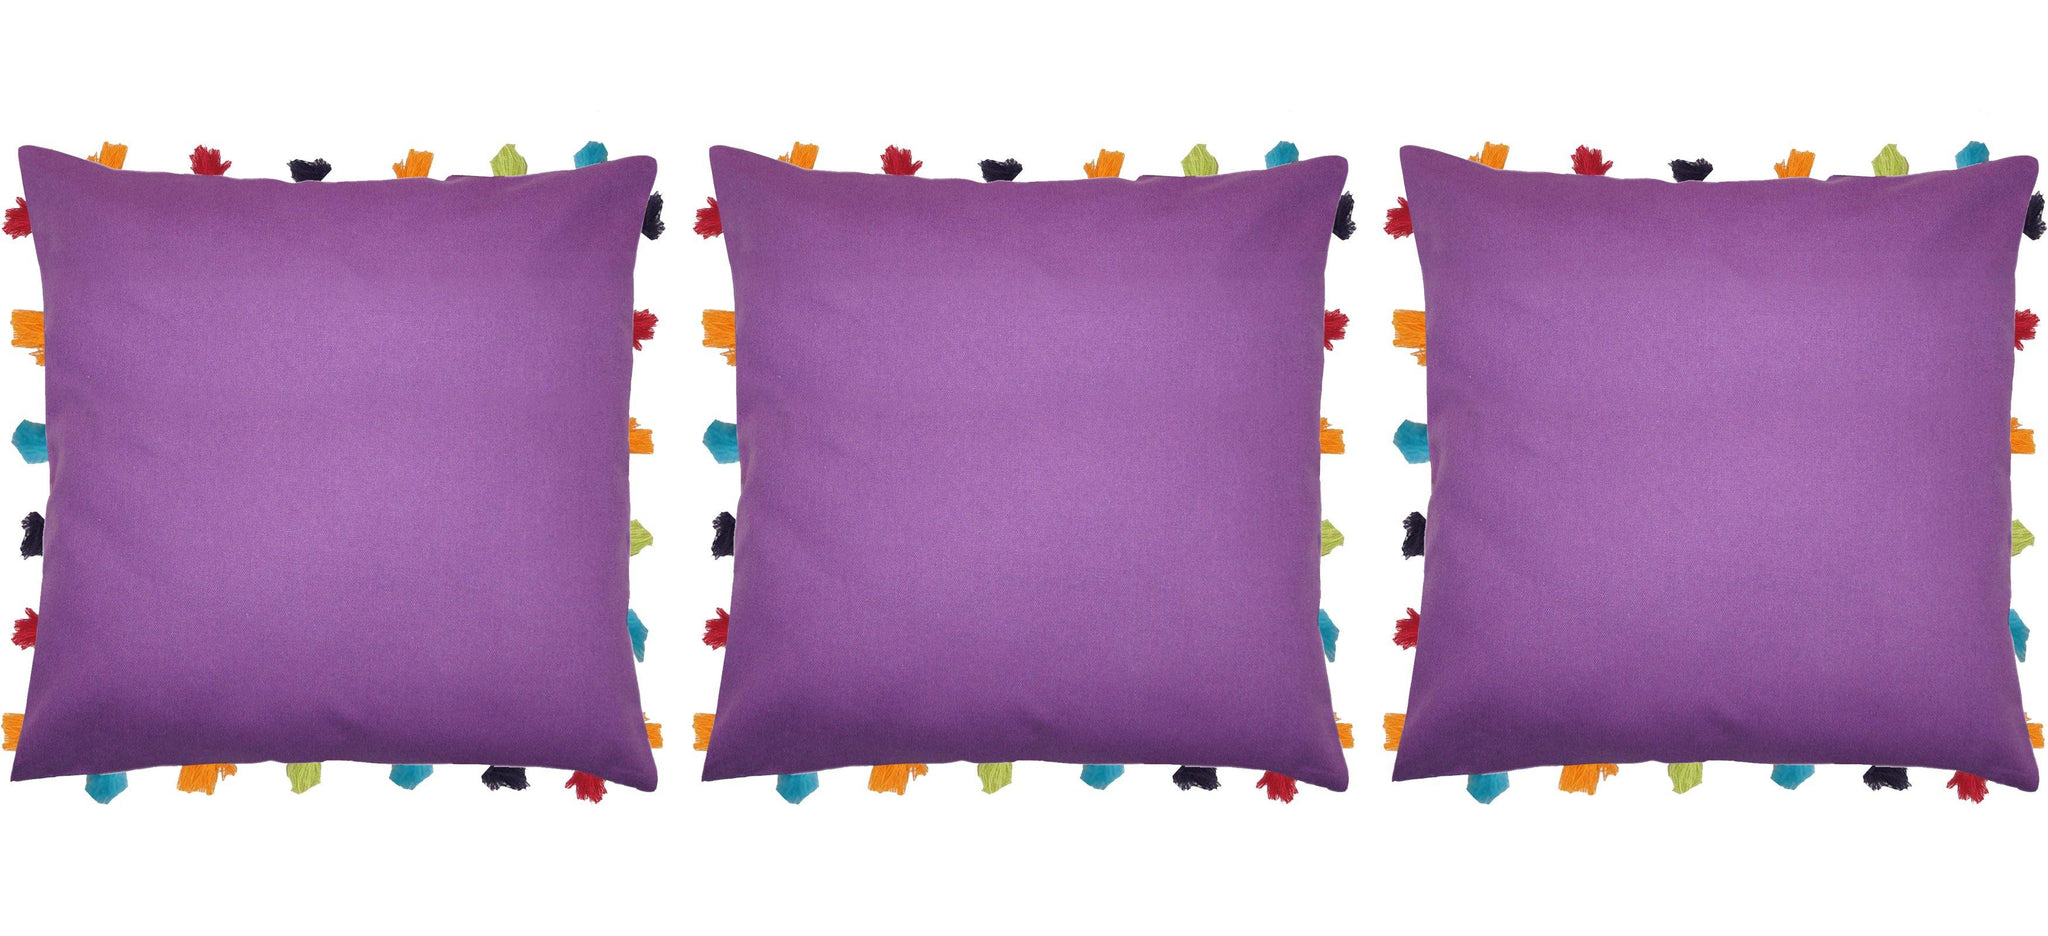 Lushomes Royal Lilac Cushion Cover with Colorful tassels (3 pcs, 18 x 18”) - Lushomes